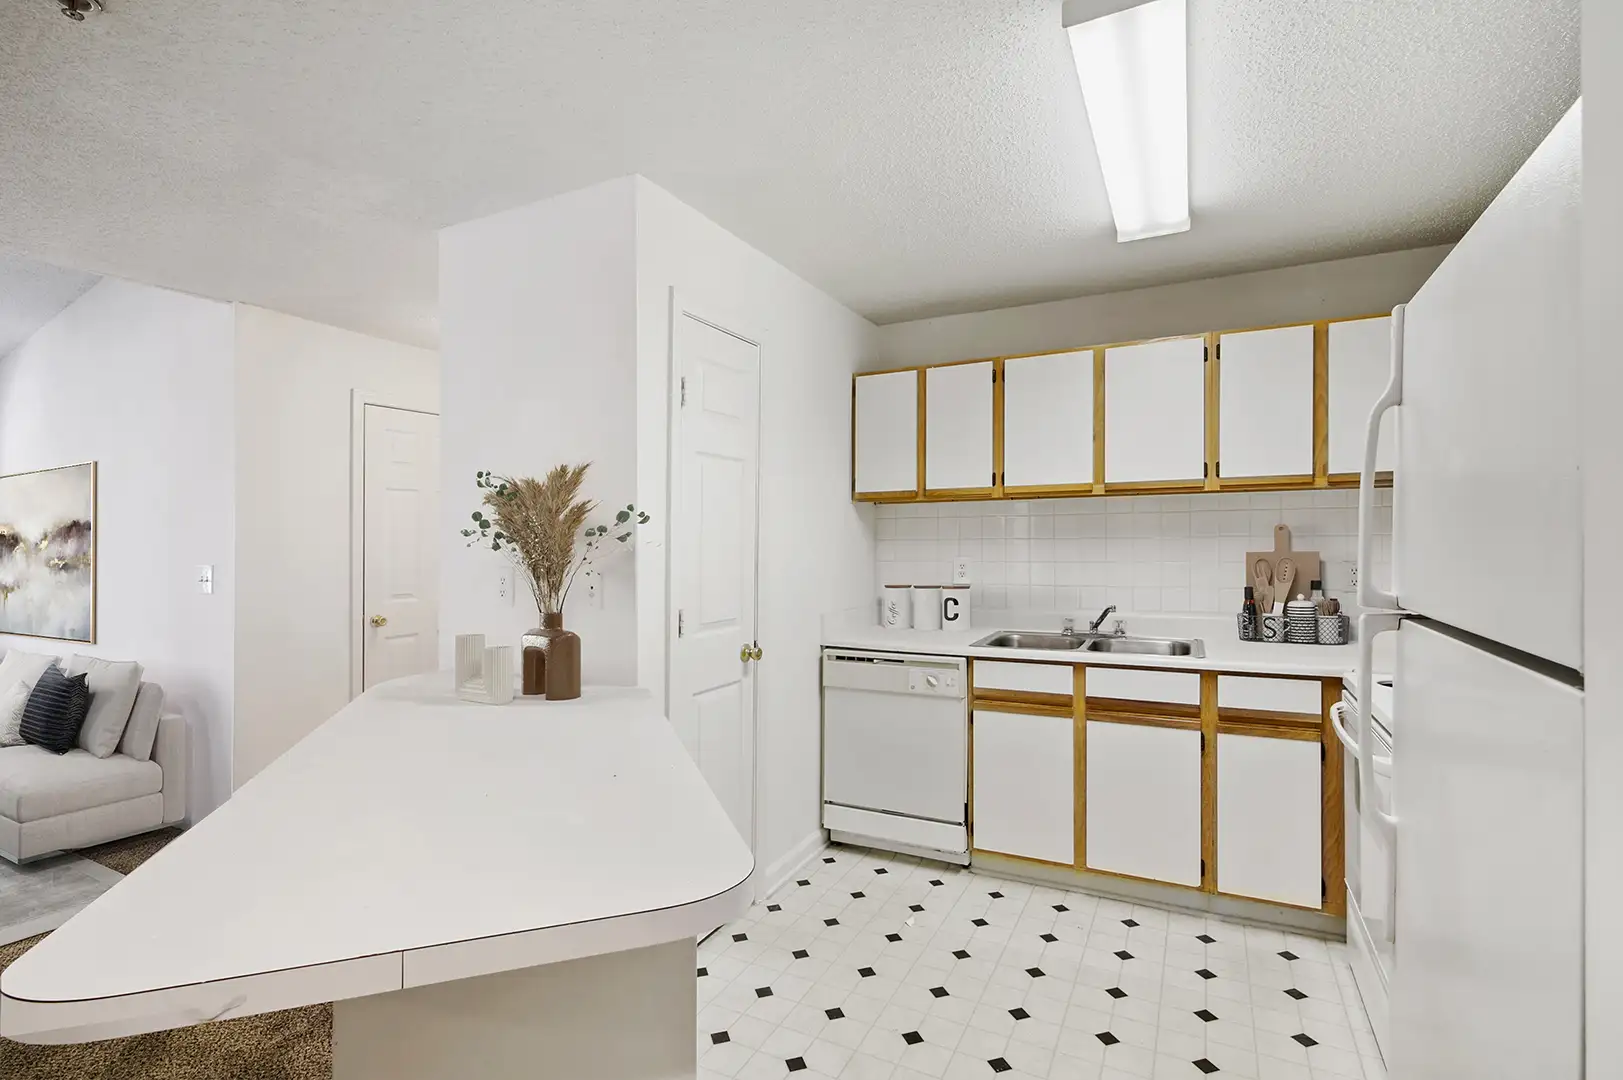 Kitchen with white cabinet doors and white appliances